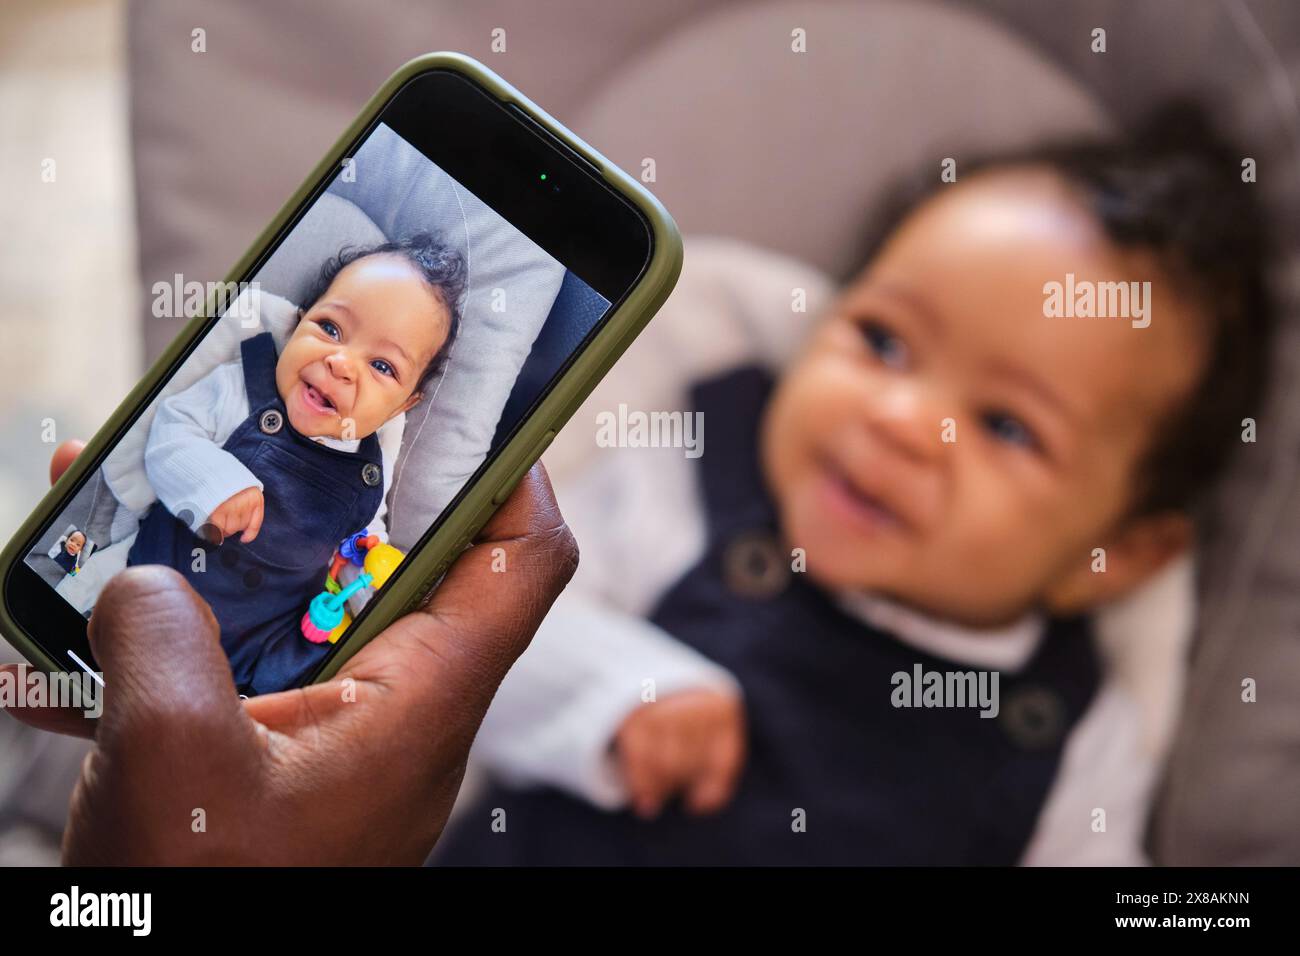 A baby is smiling at the camera while her mom is taking a photo. Stock Photo